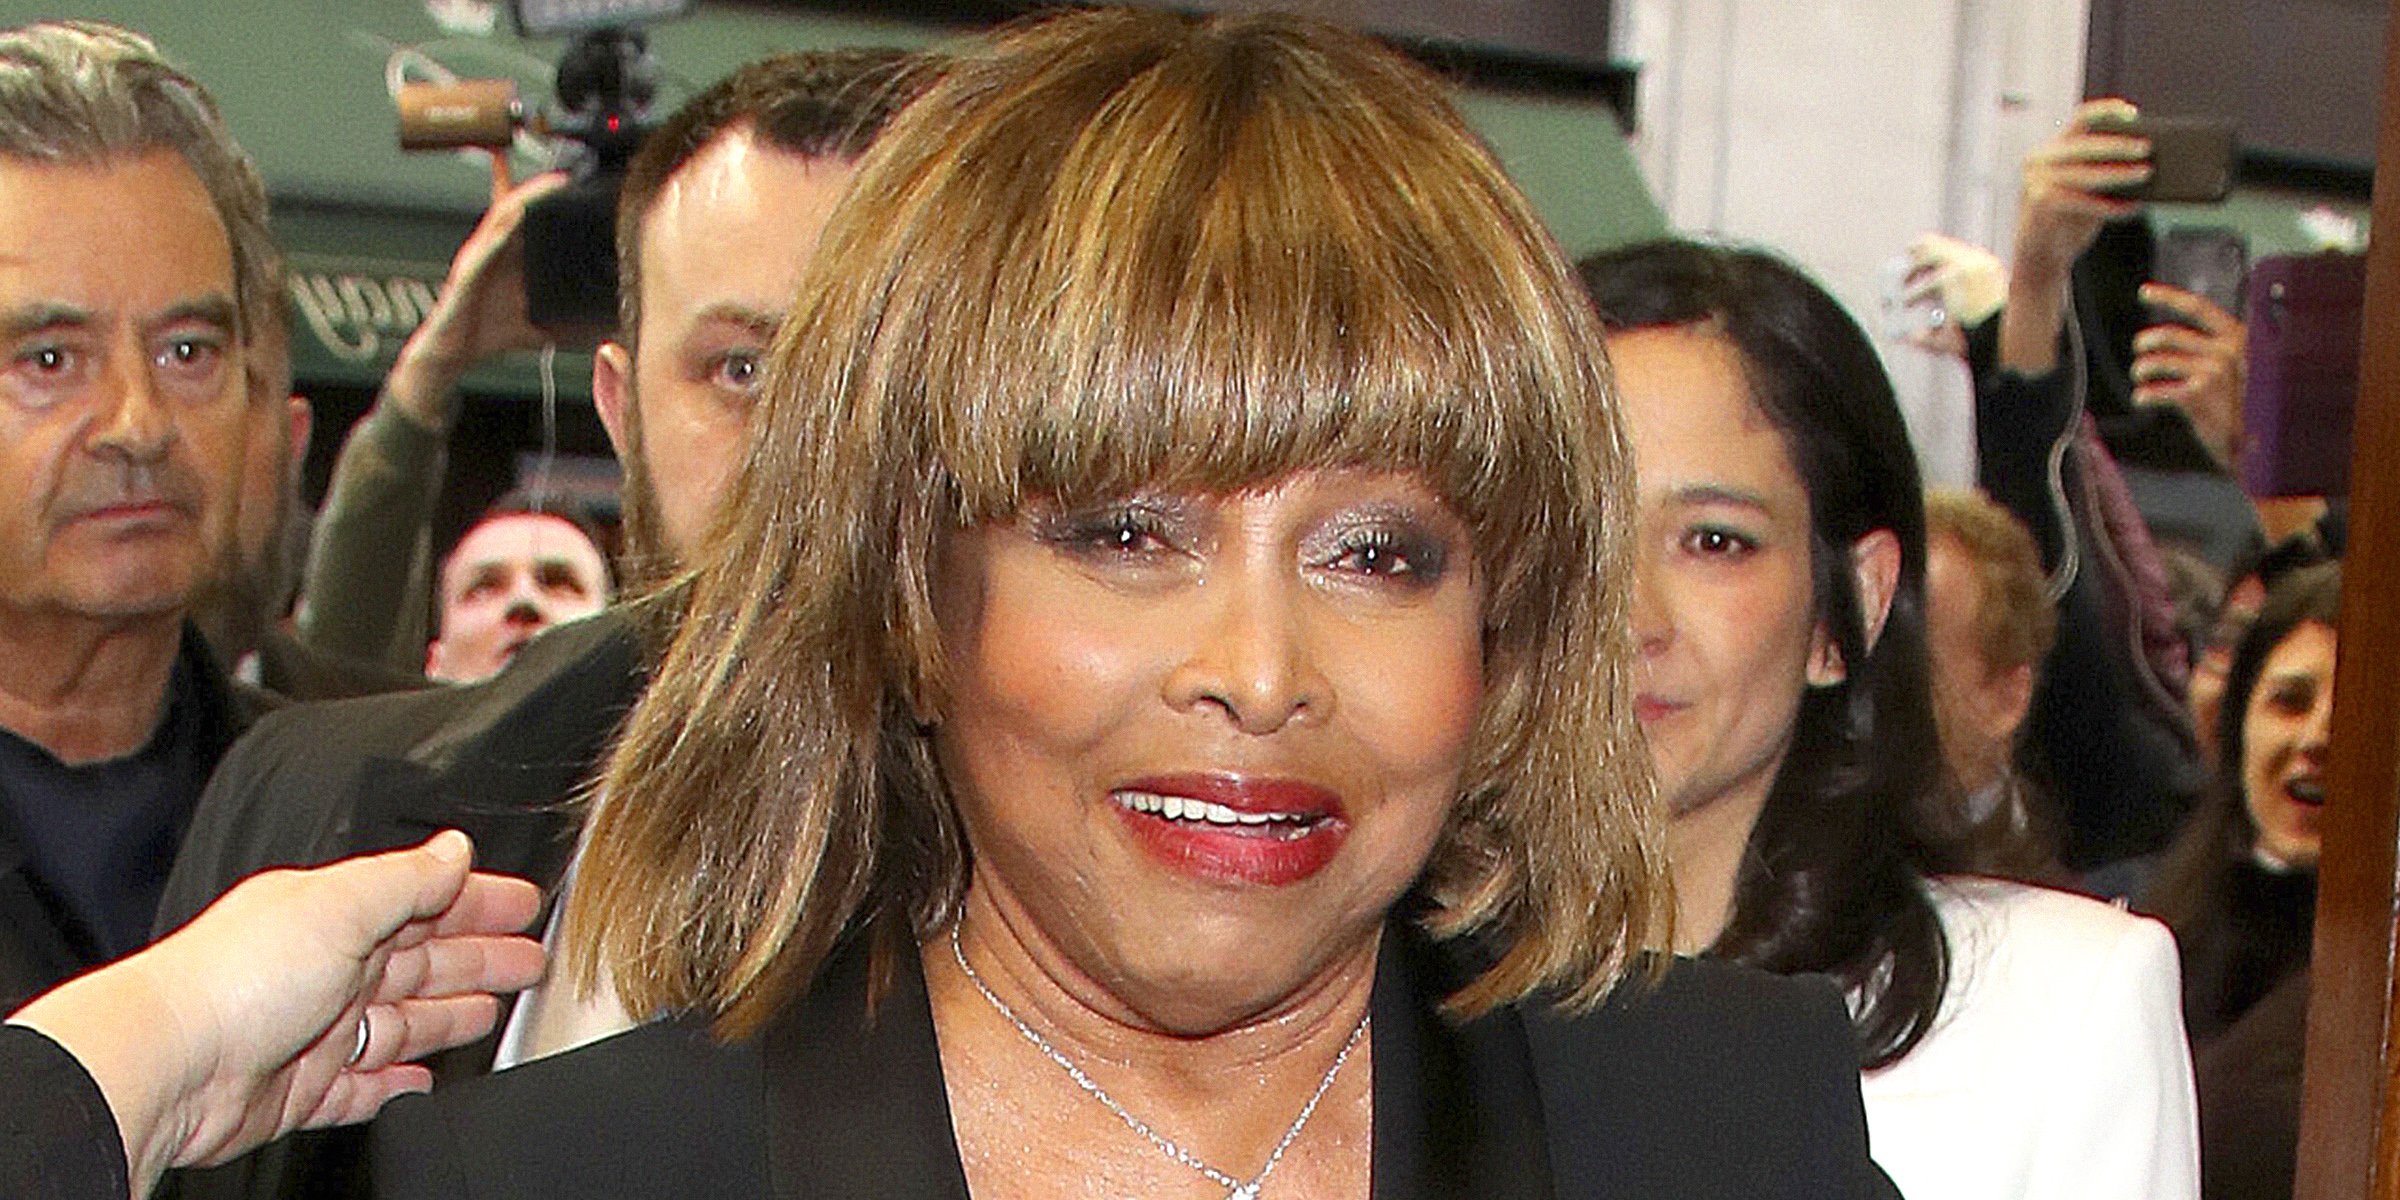 Tina Turner, 2018 | Source: Getty Images